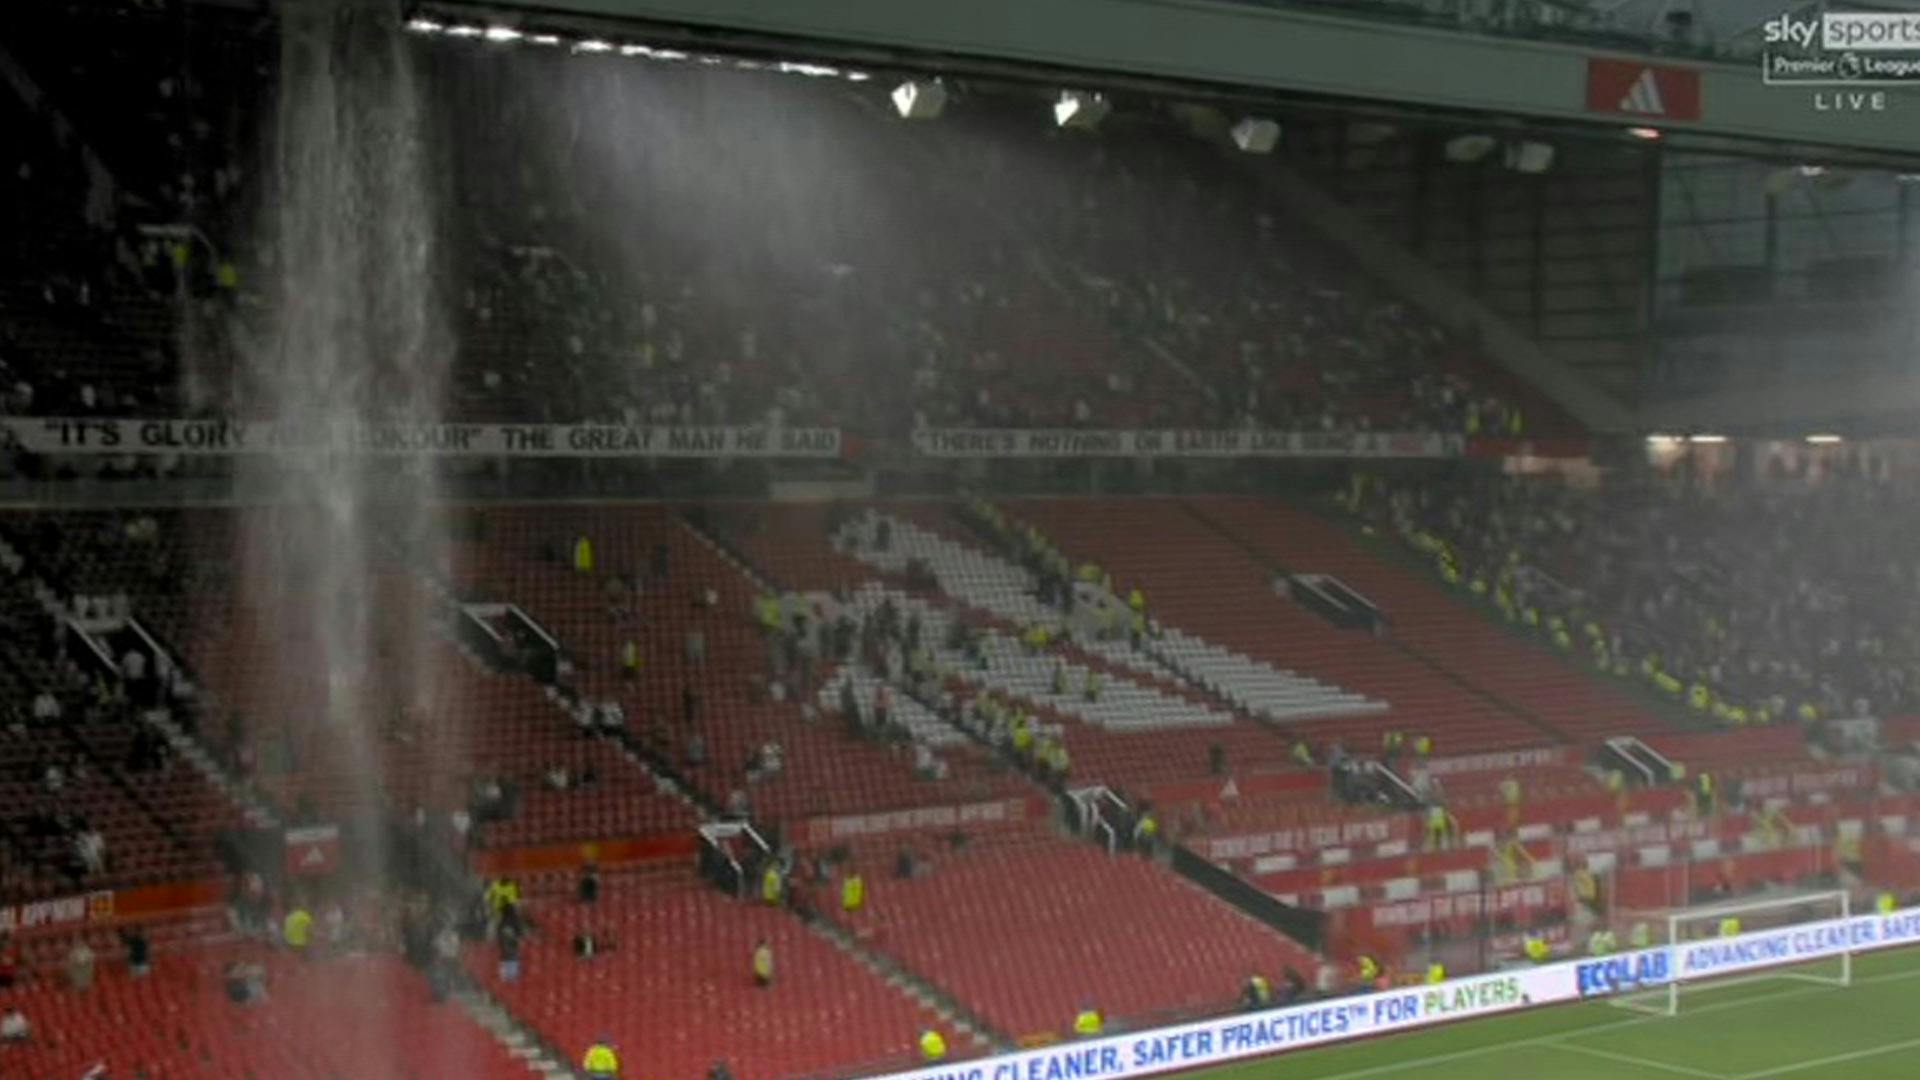 Post-Arsenal Loss, Old Trafford's Leaky Roof Highlights Glazer's Mismanagement